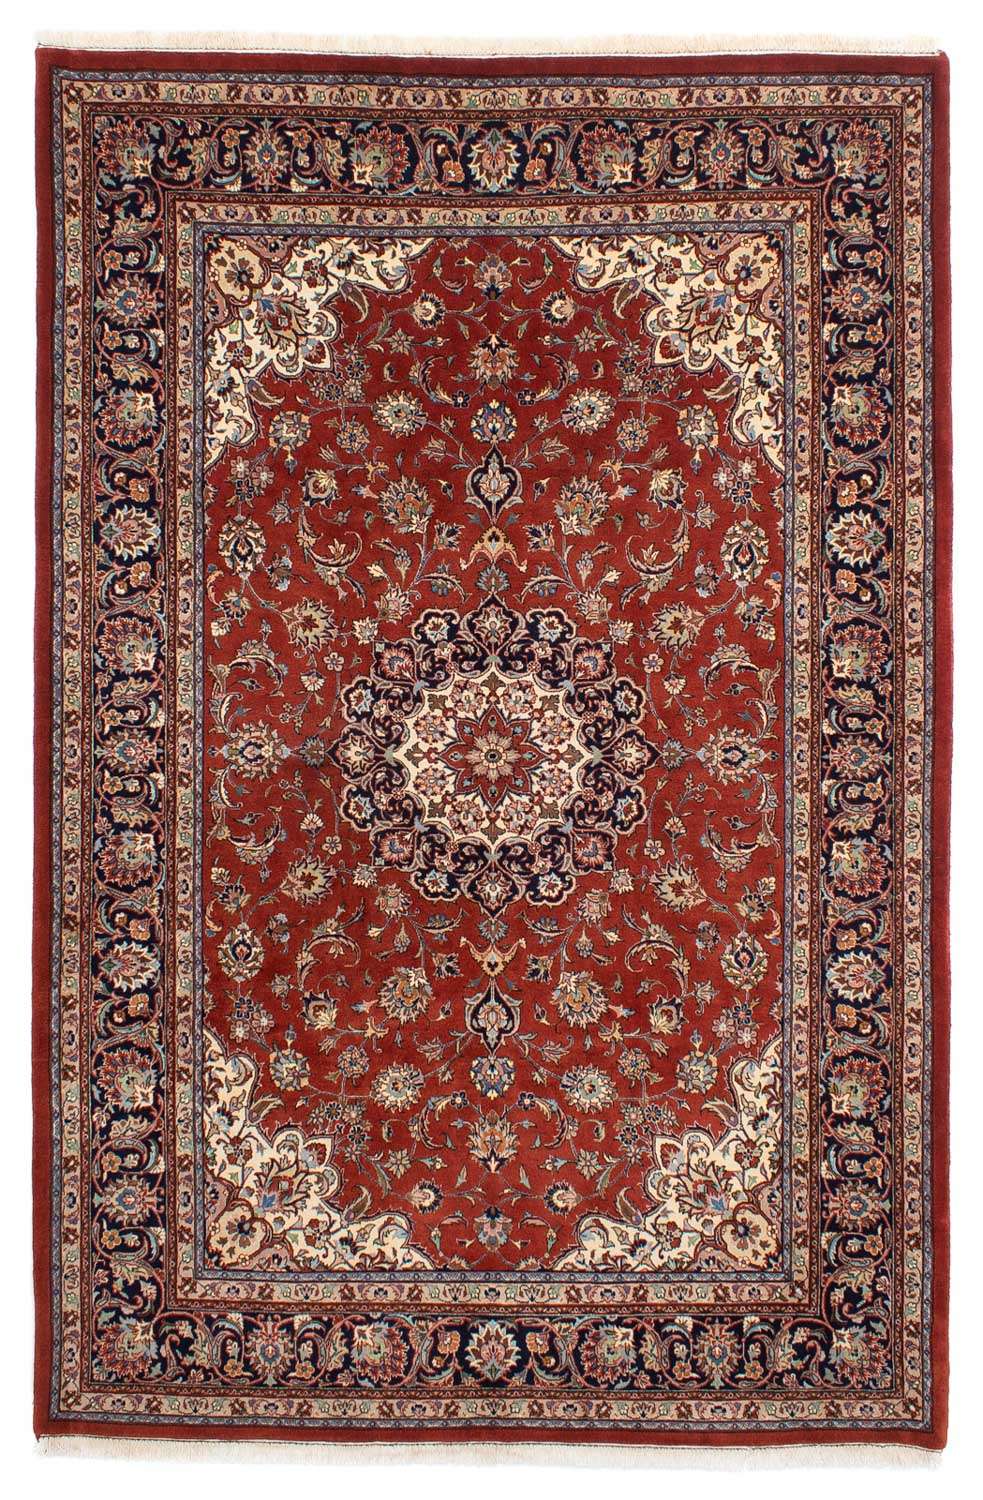 Perser Rug - Classic - 293 x 201 cm - red